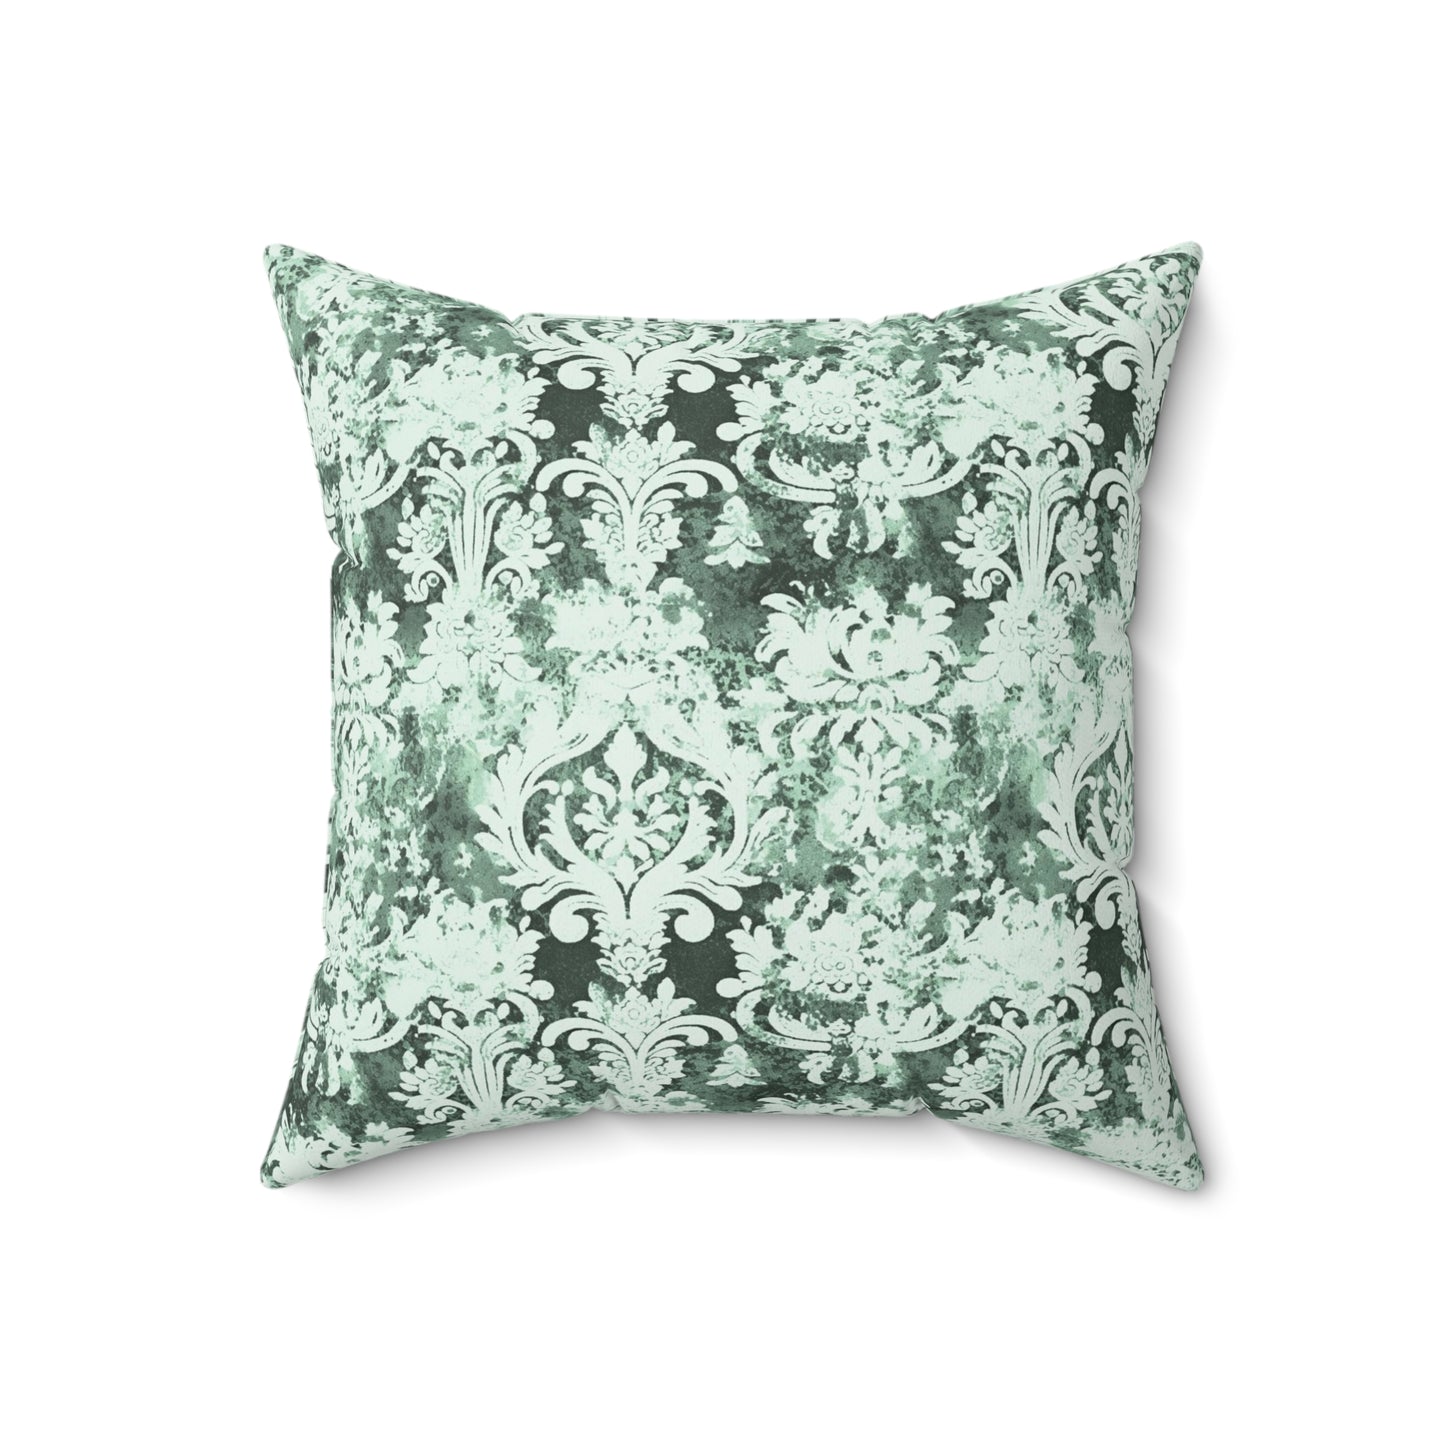 Vintage Green Damask 77 - Beautiful, Shabby Chic, Boho, Fun - Faux Suede Square Pillow